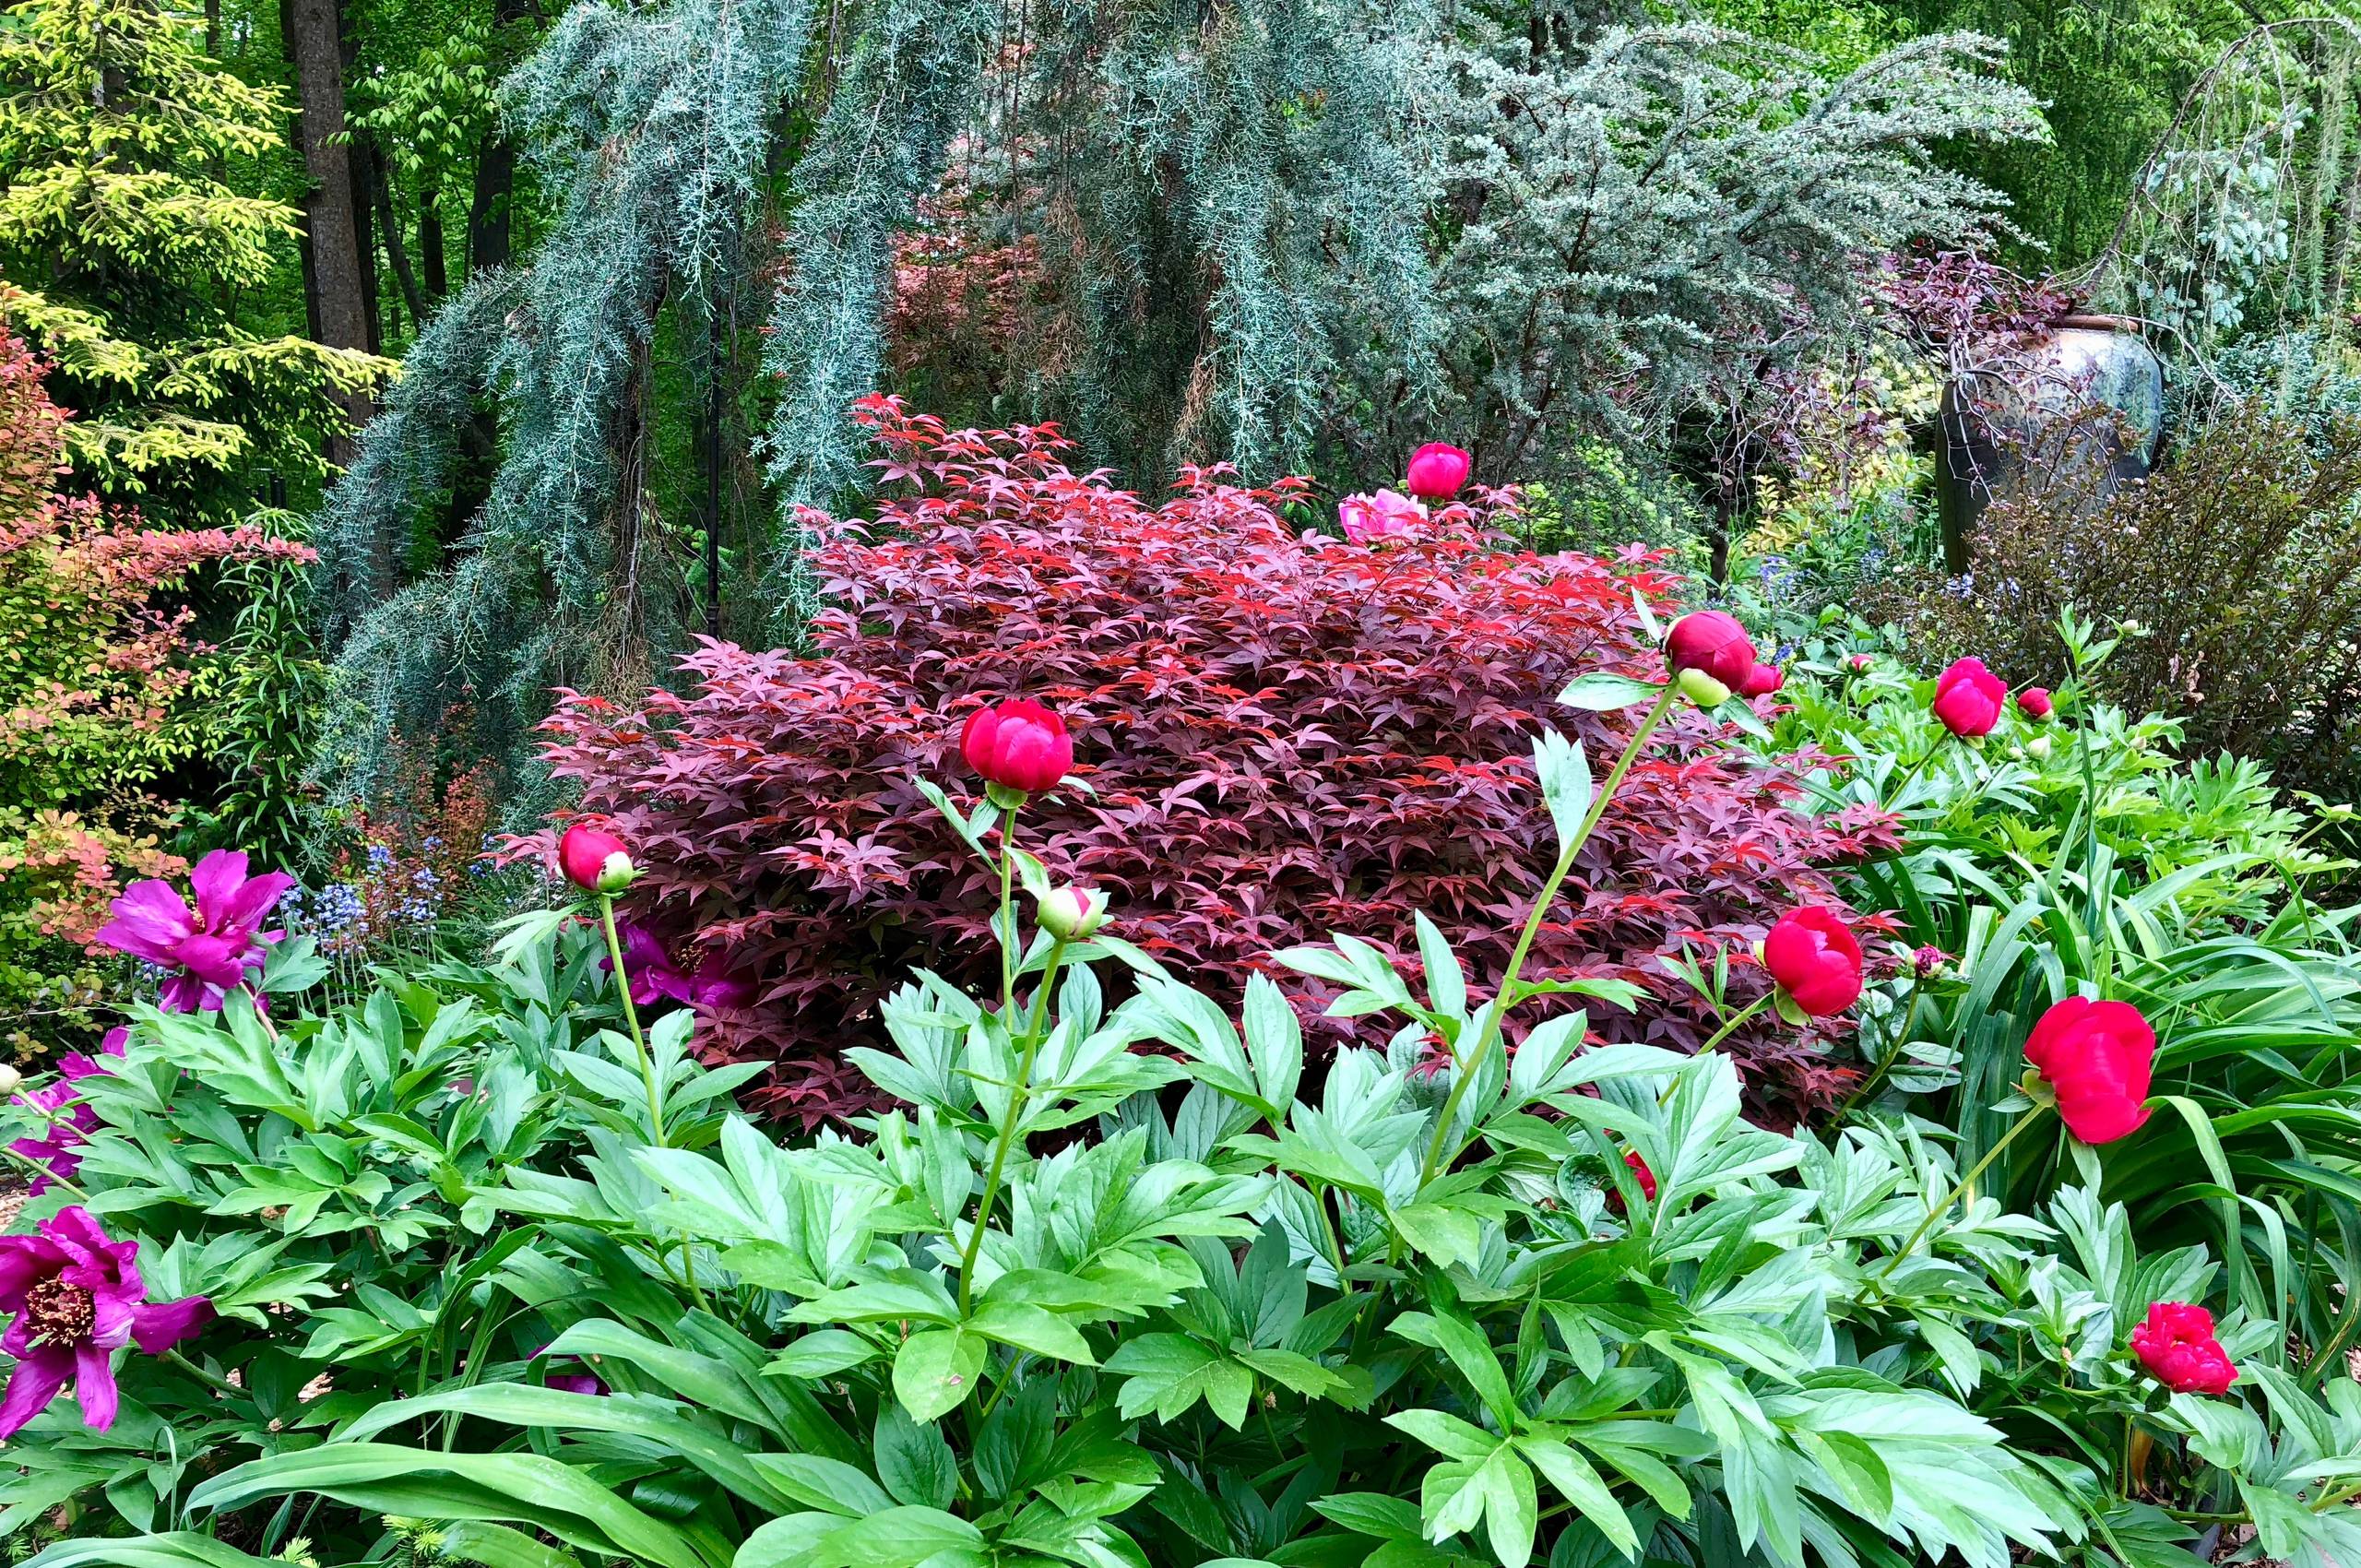 Peonies and Japanese maple in the front garden.